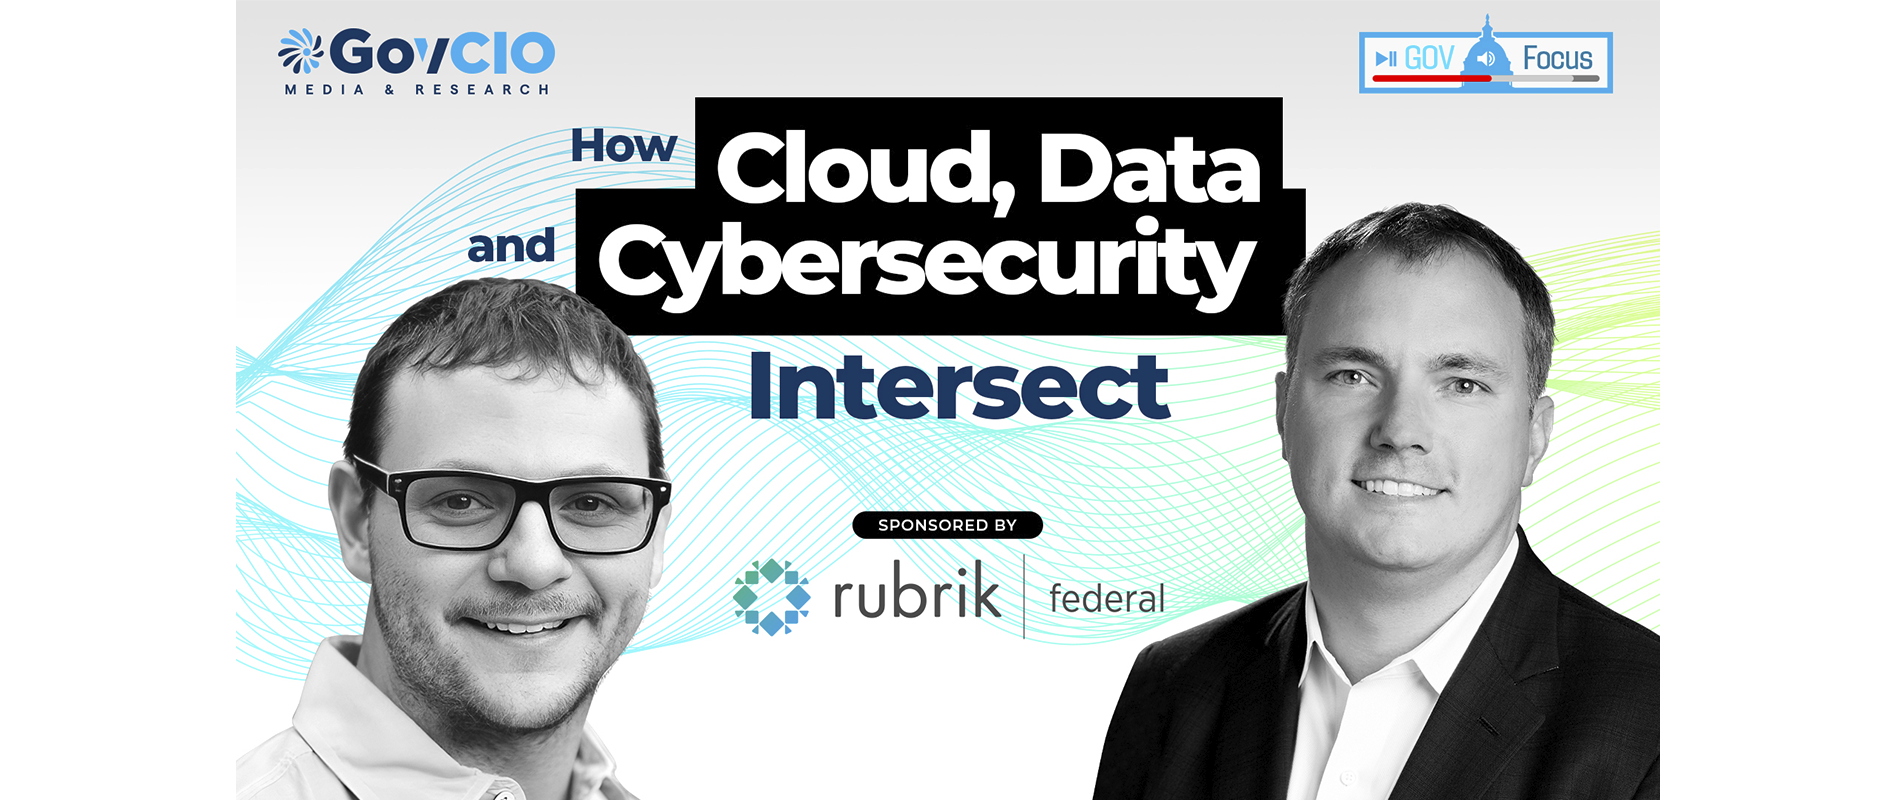 GovFocus How Cloud, Data and Cybersecurity Intersect